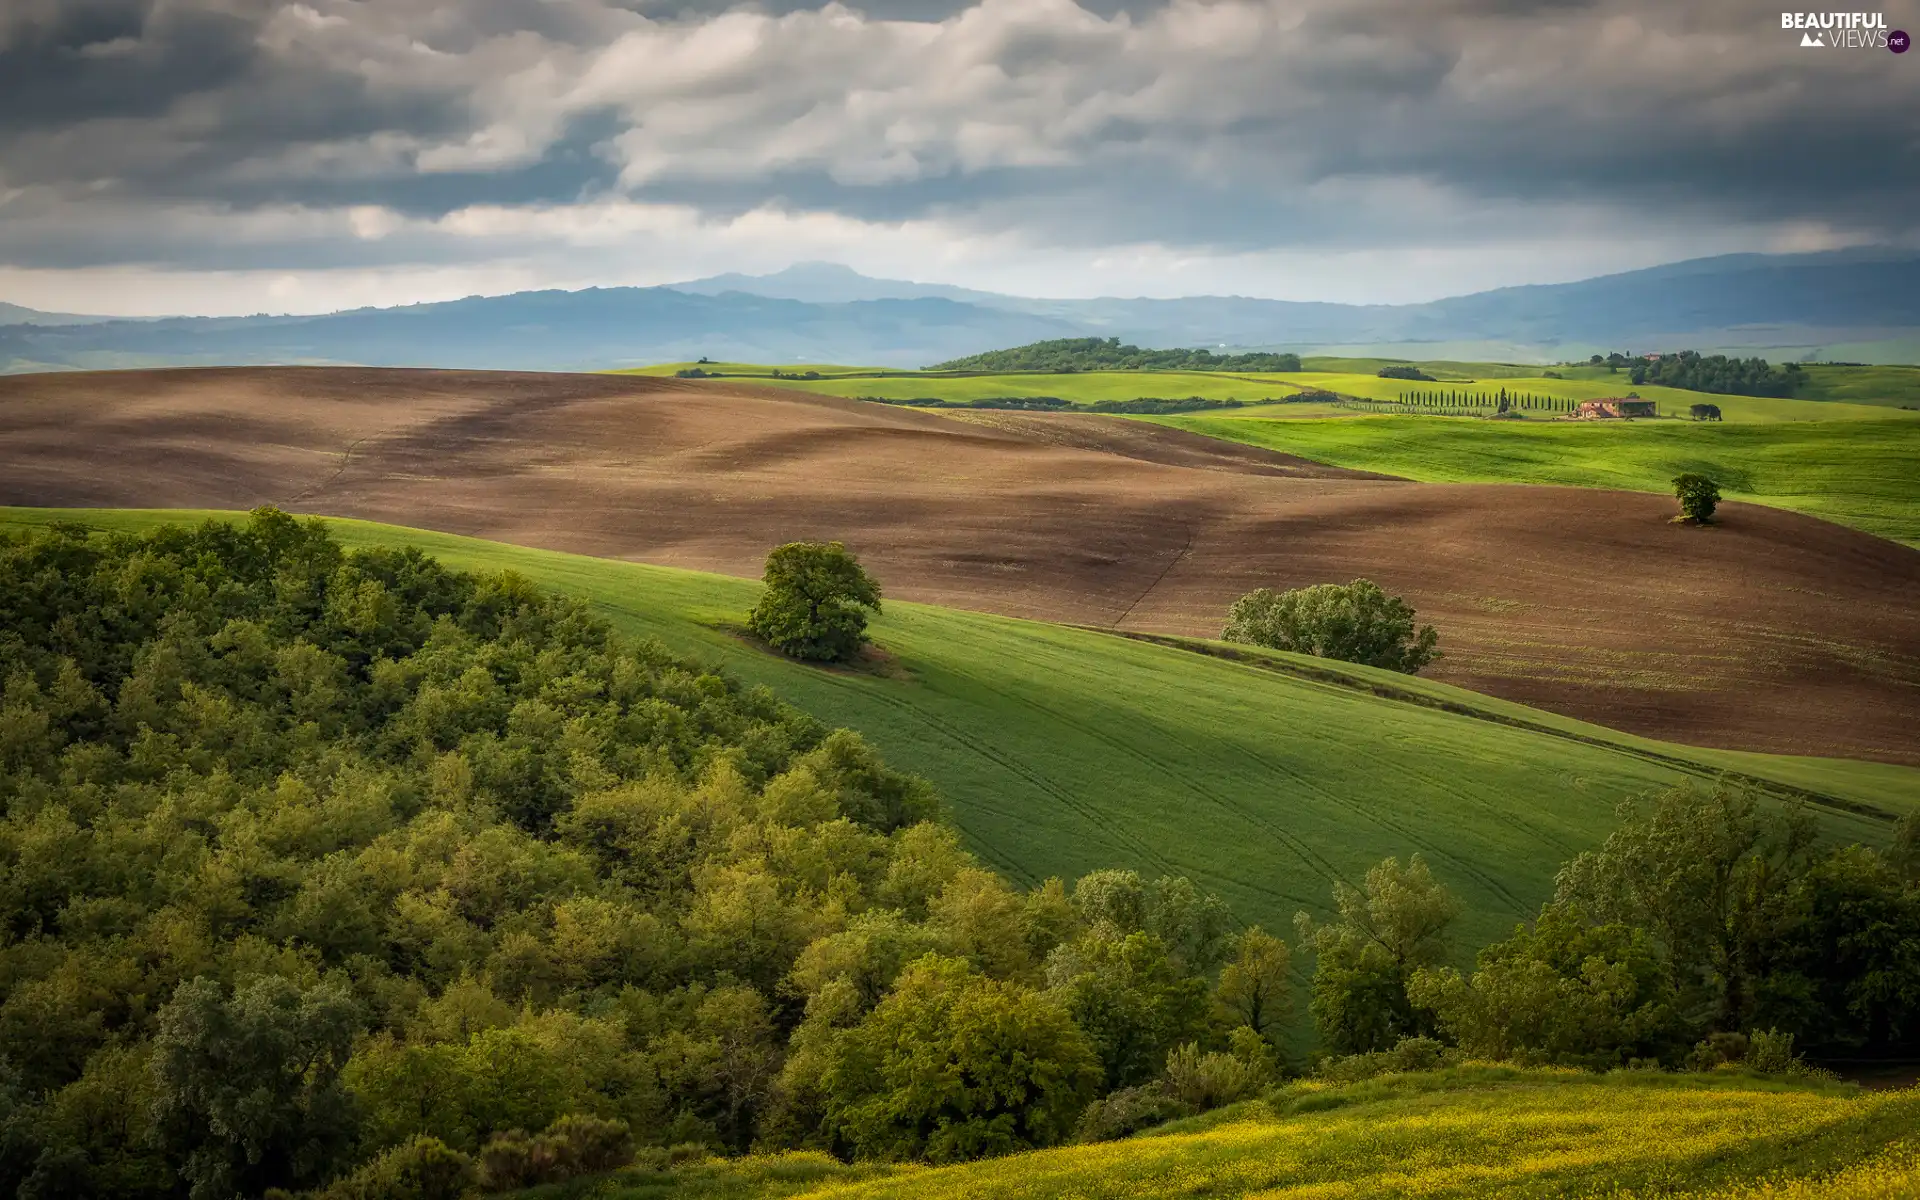 viewes, The Hills, Tuscany, trees, Field, Houses, Italy